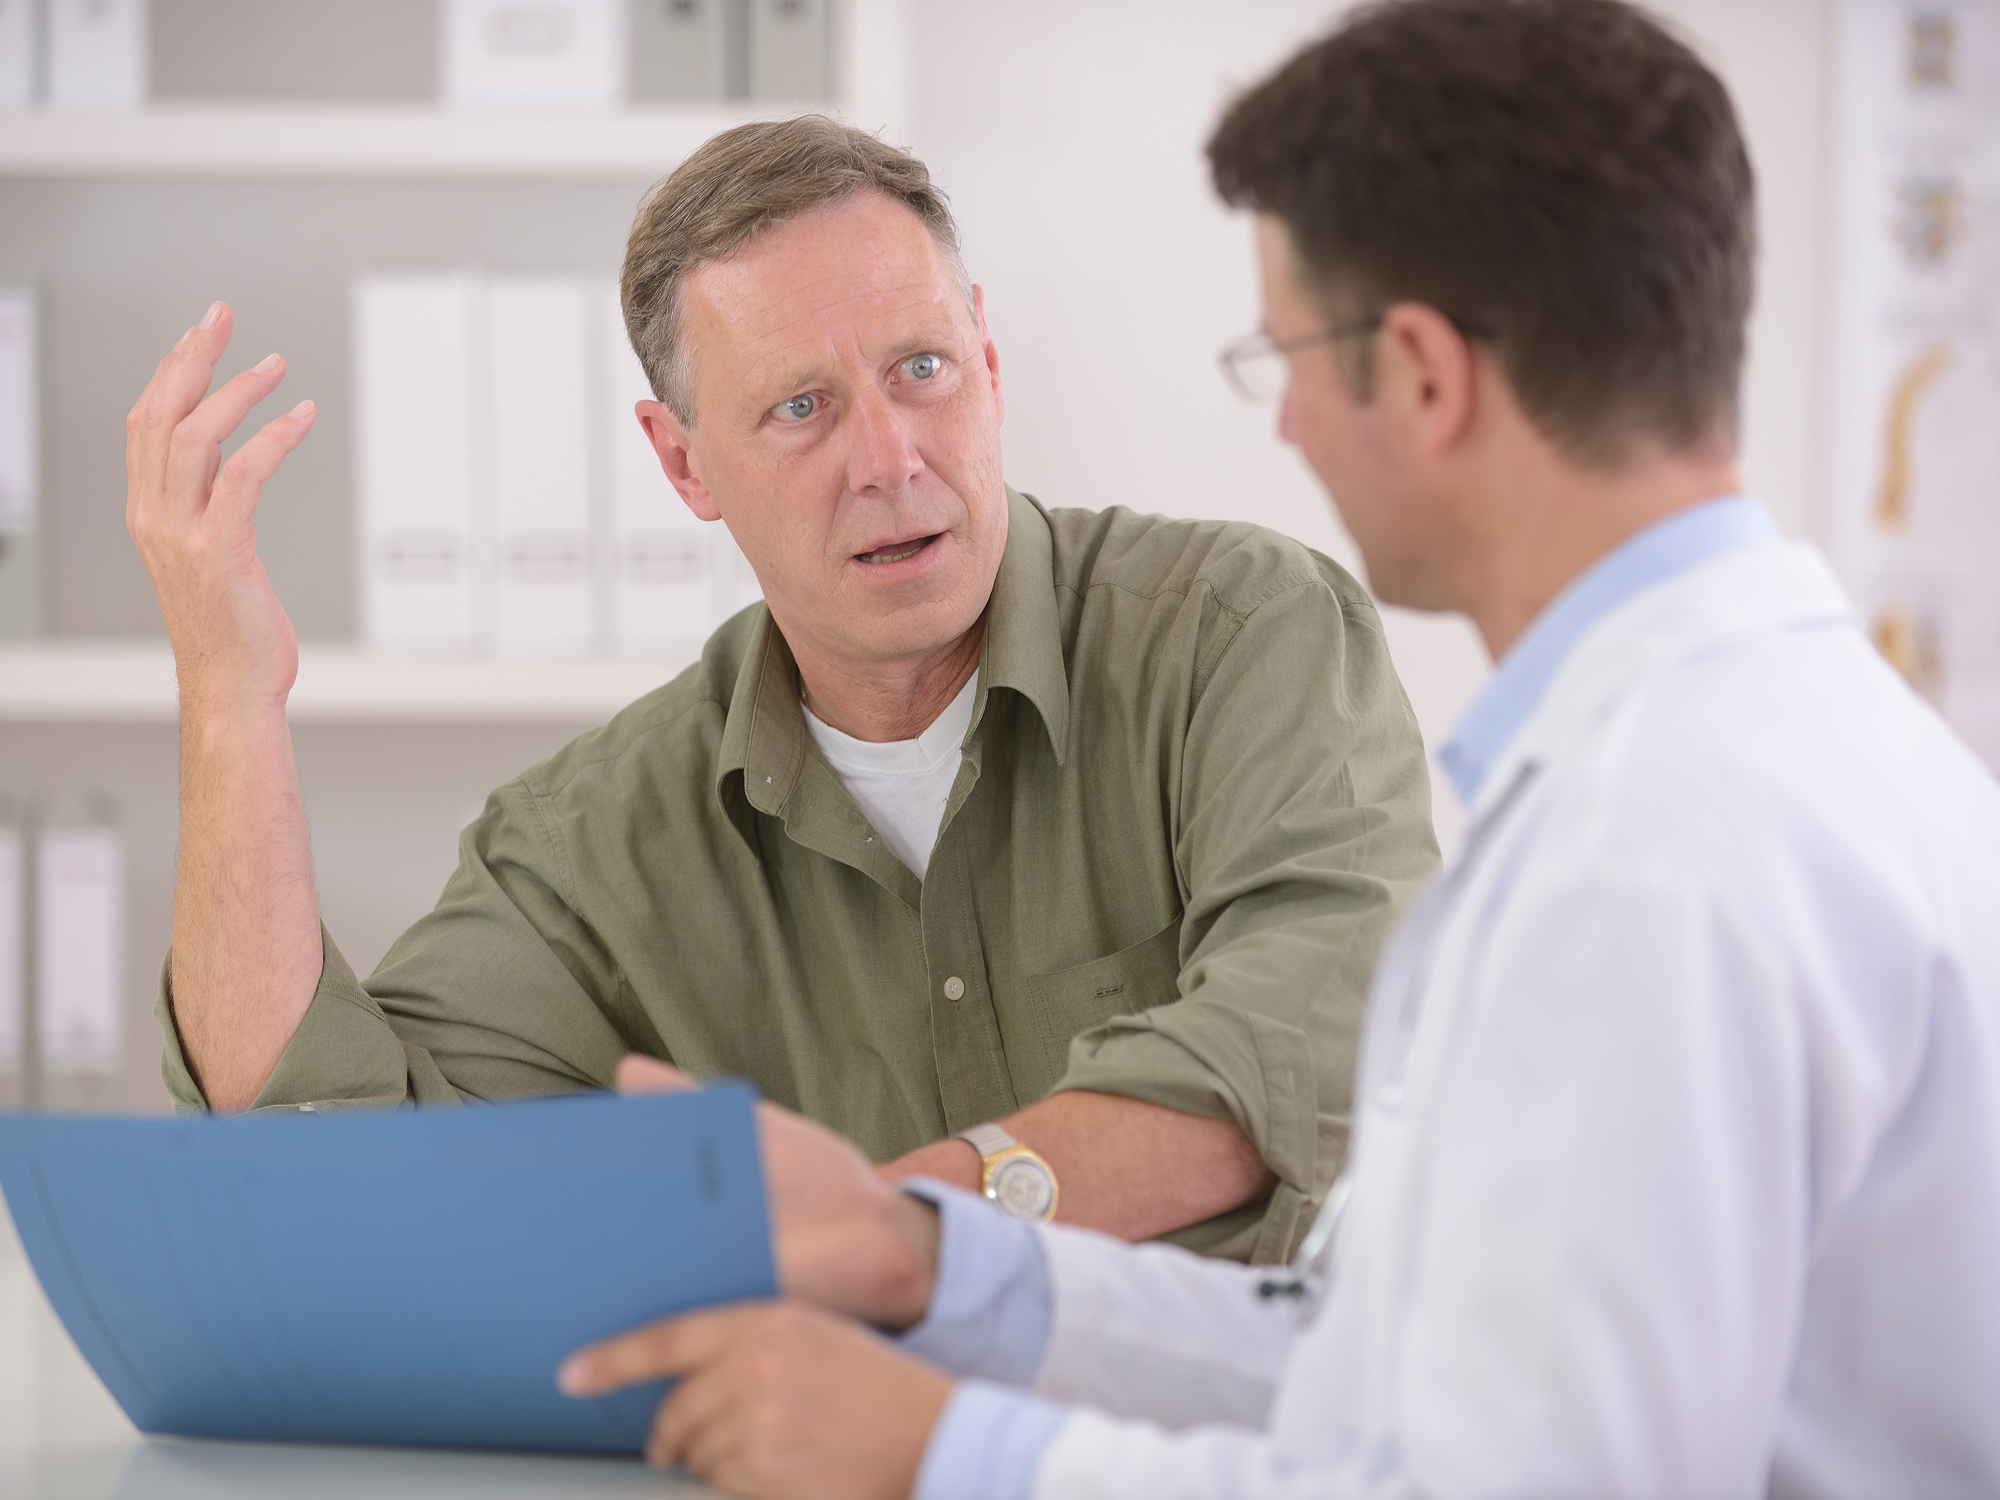 Does a high PSA blood test mean you have prostate cancer?